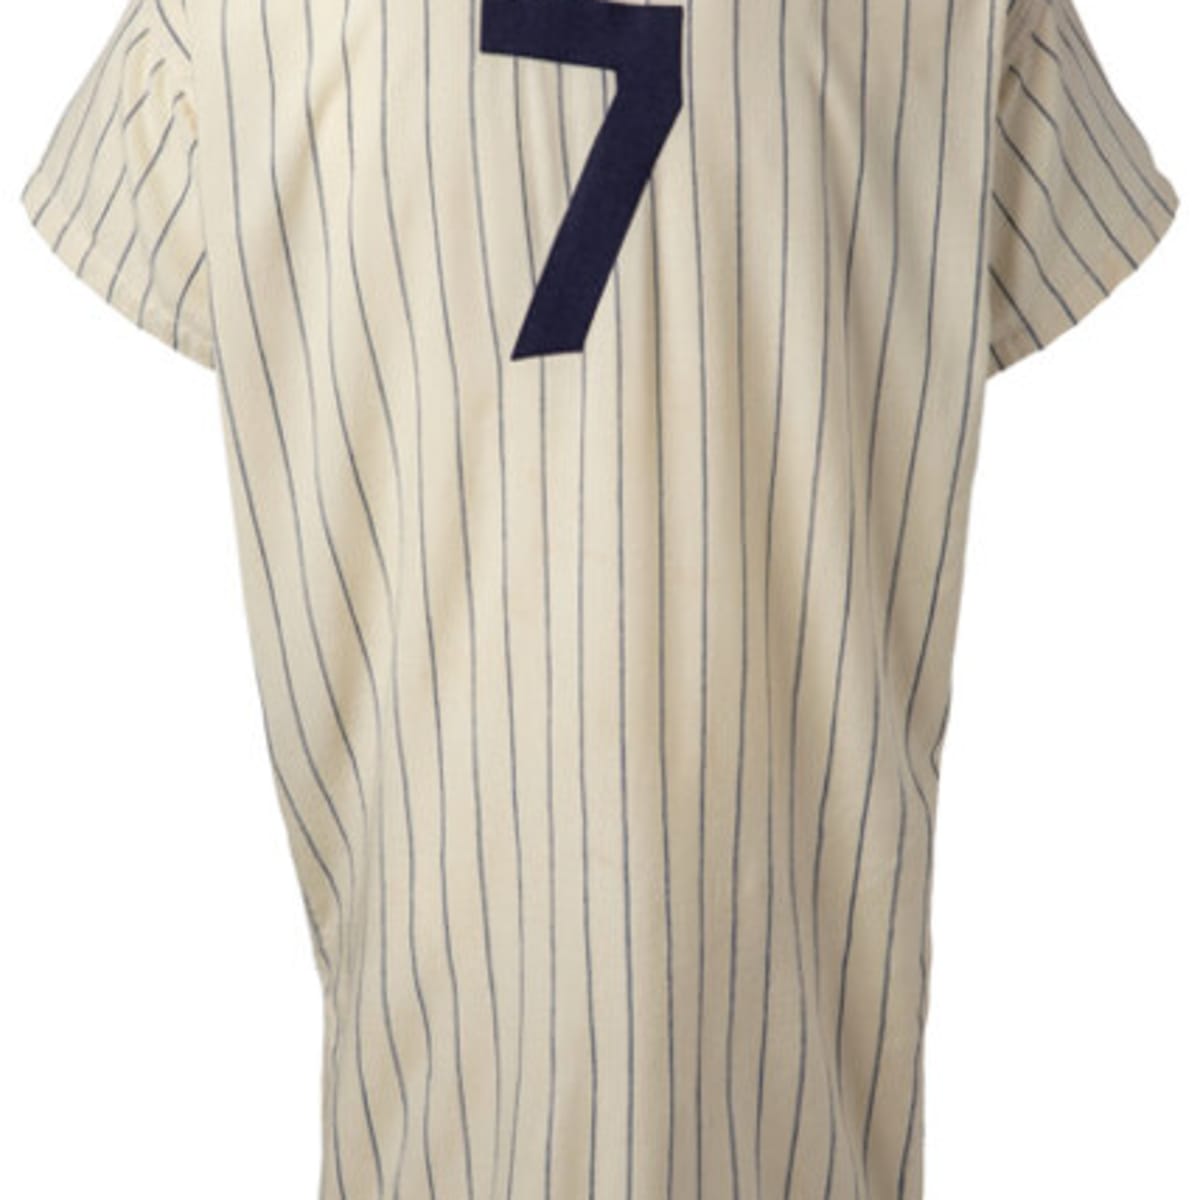 Mickey Mantle's Final Yankees Jersey Hits Auction, Expected To Fetch $1 Mil